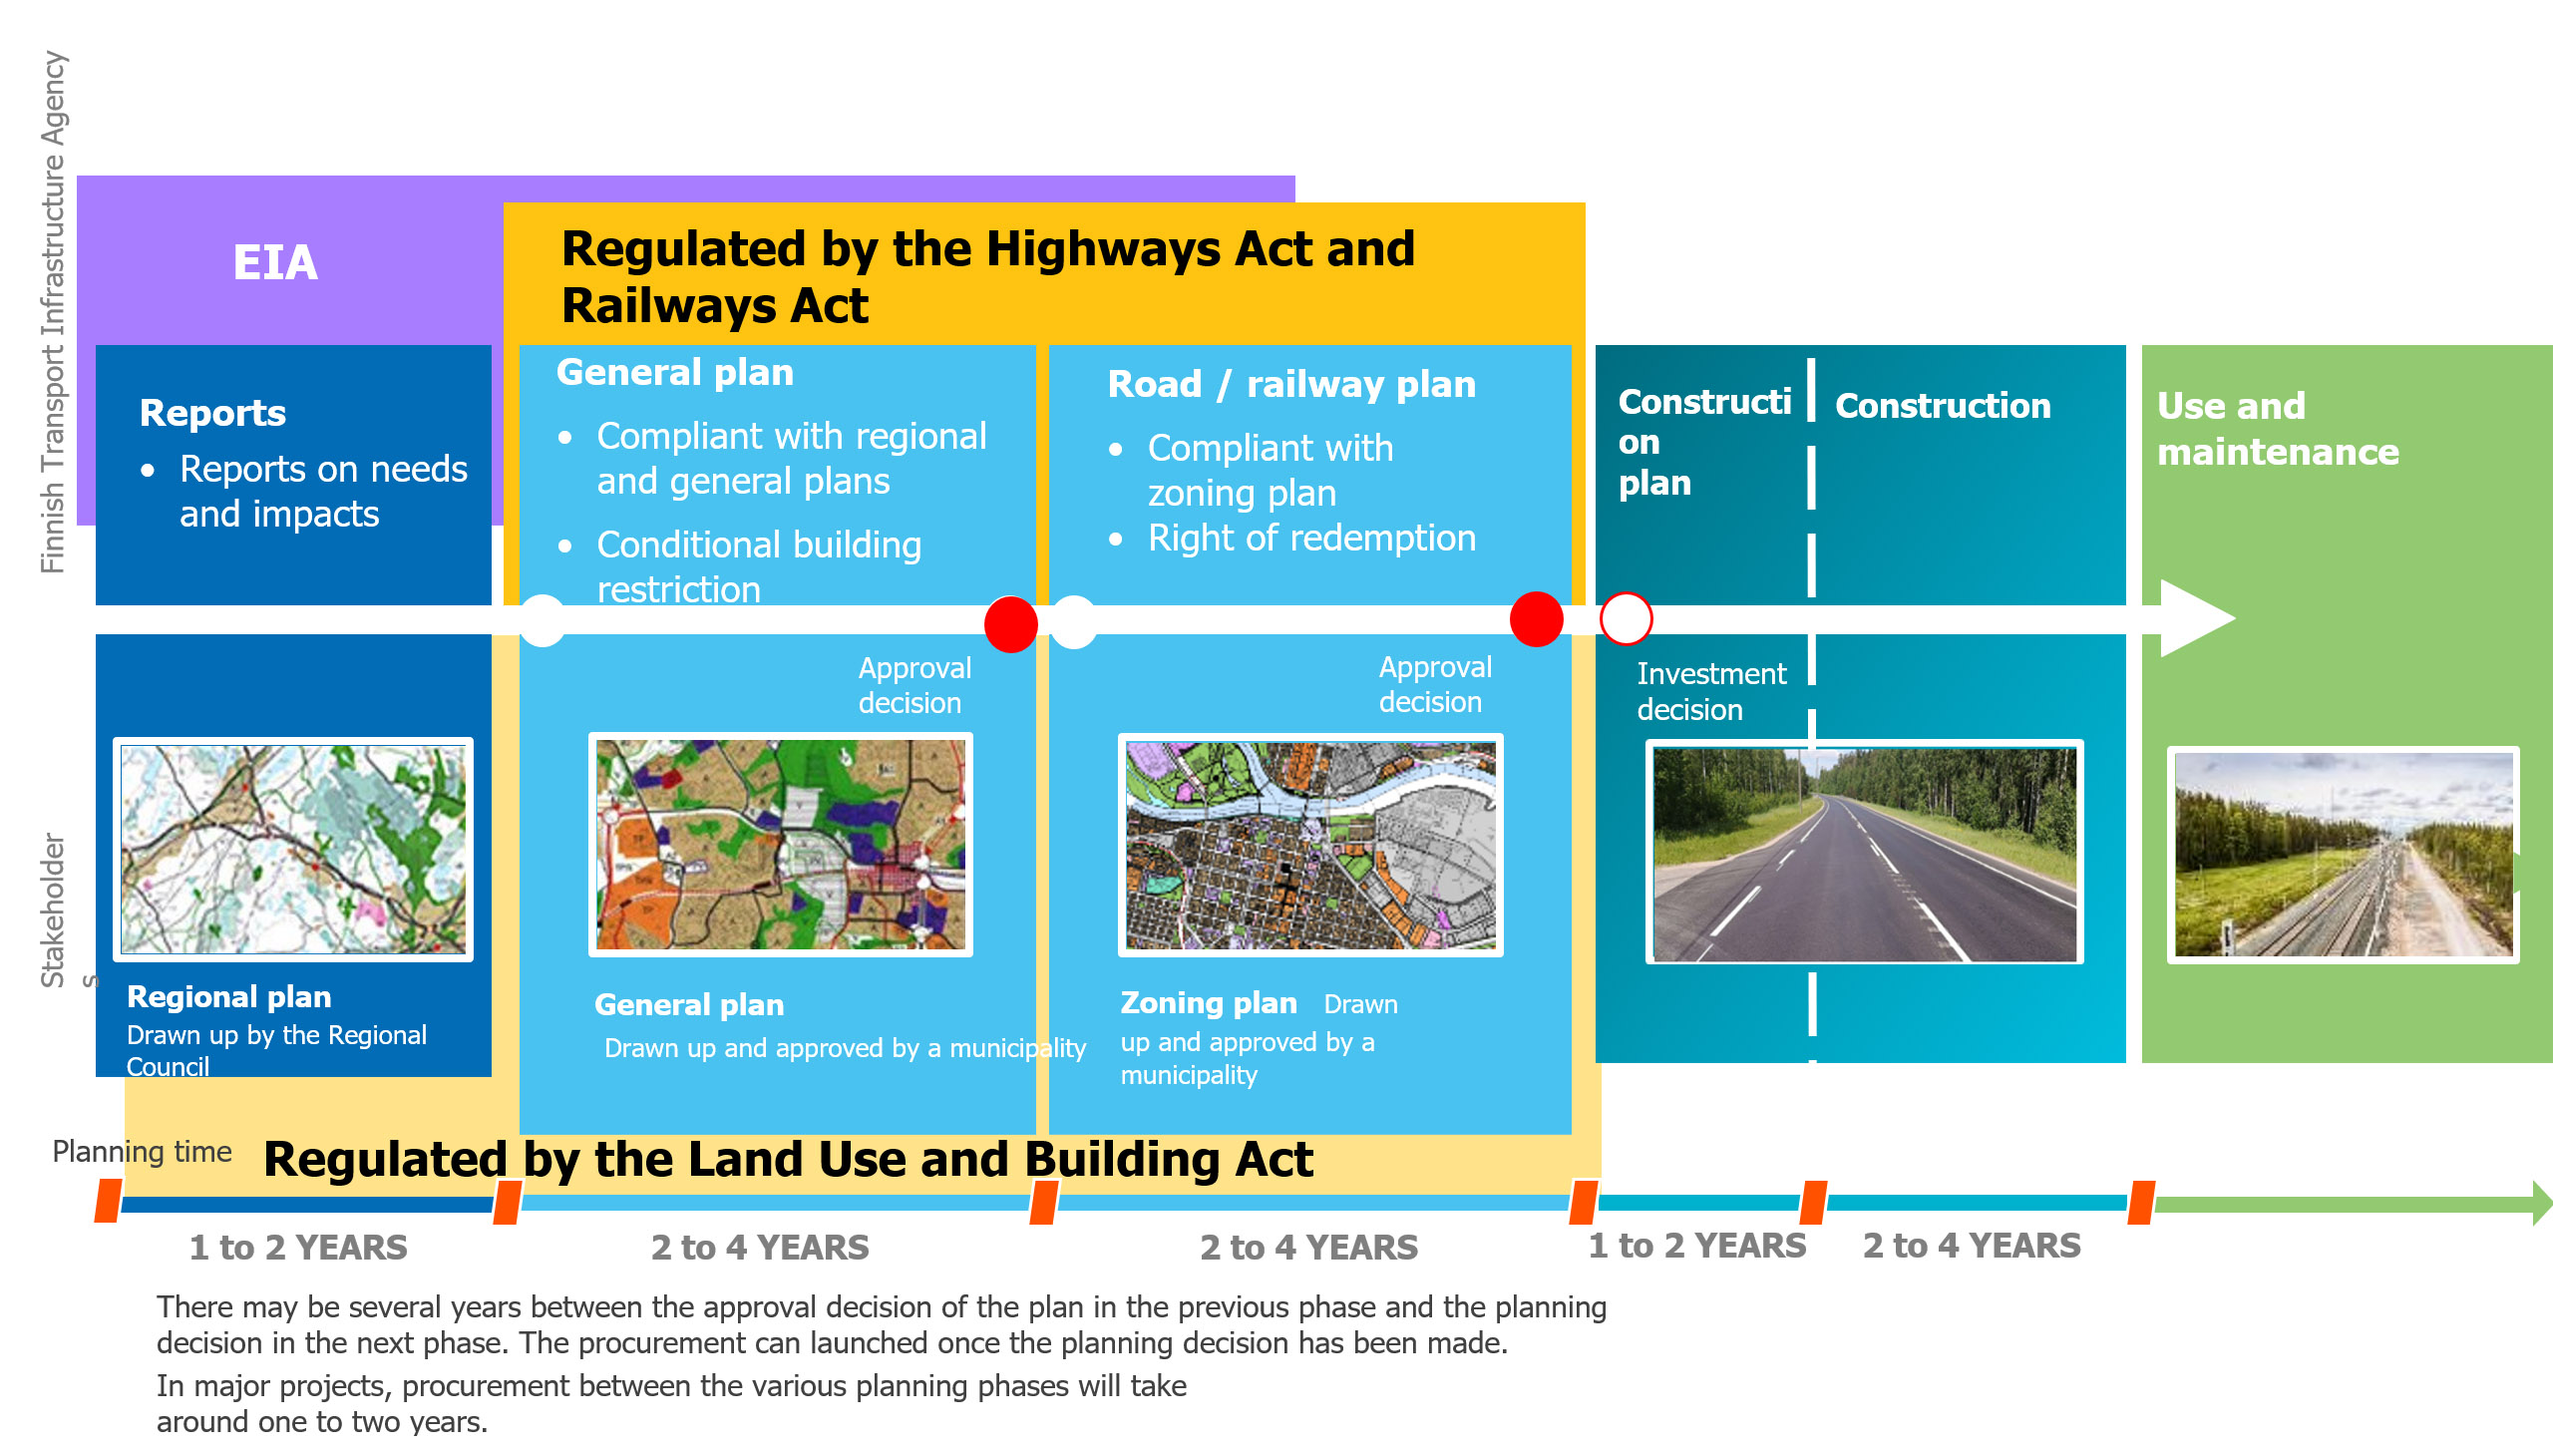 An infographic describing the progress of a road or railway project. First, surveys are made, then a general plan, a road or railway plan, a construction plan, and finally construction and use and maintenance. Each stage takes at least 1-2 years.